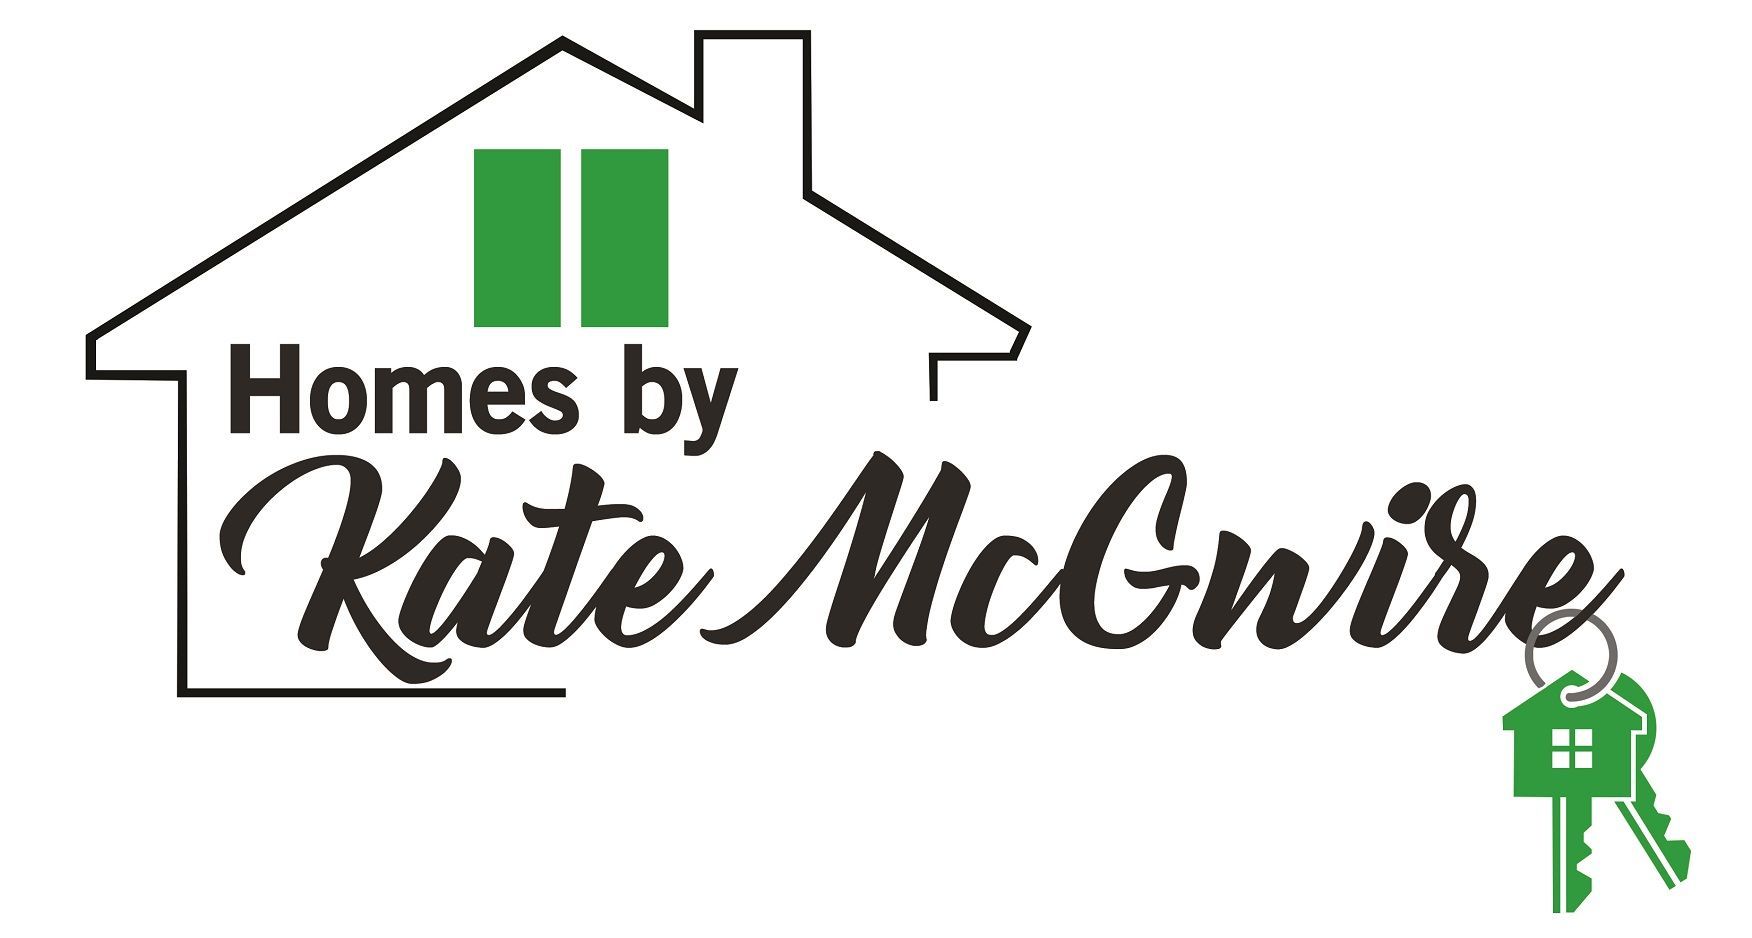 Homes by Kate McGwire 